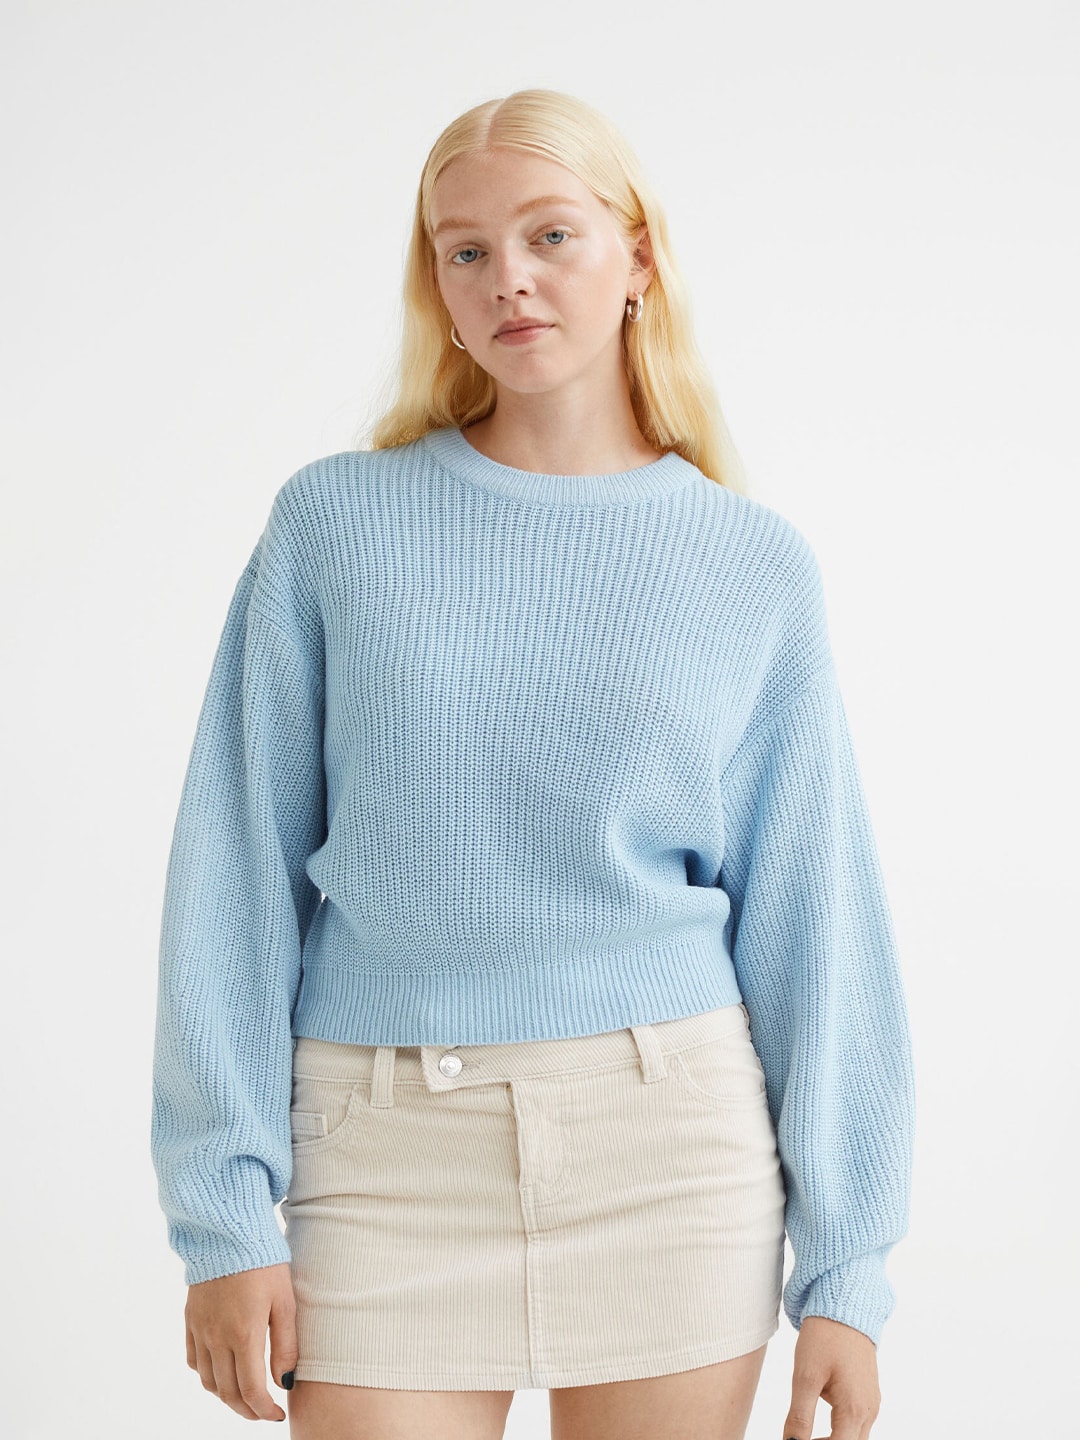 H&M Women Blue Knitted Acrylic Jumper Price in India